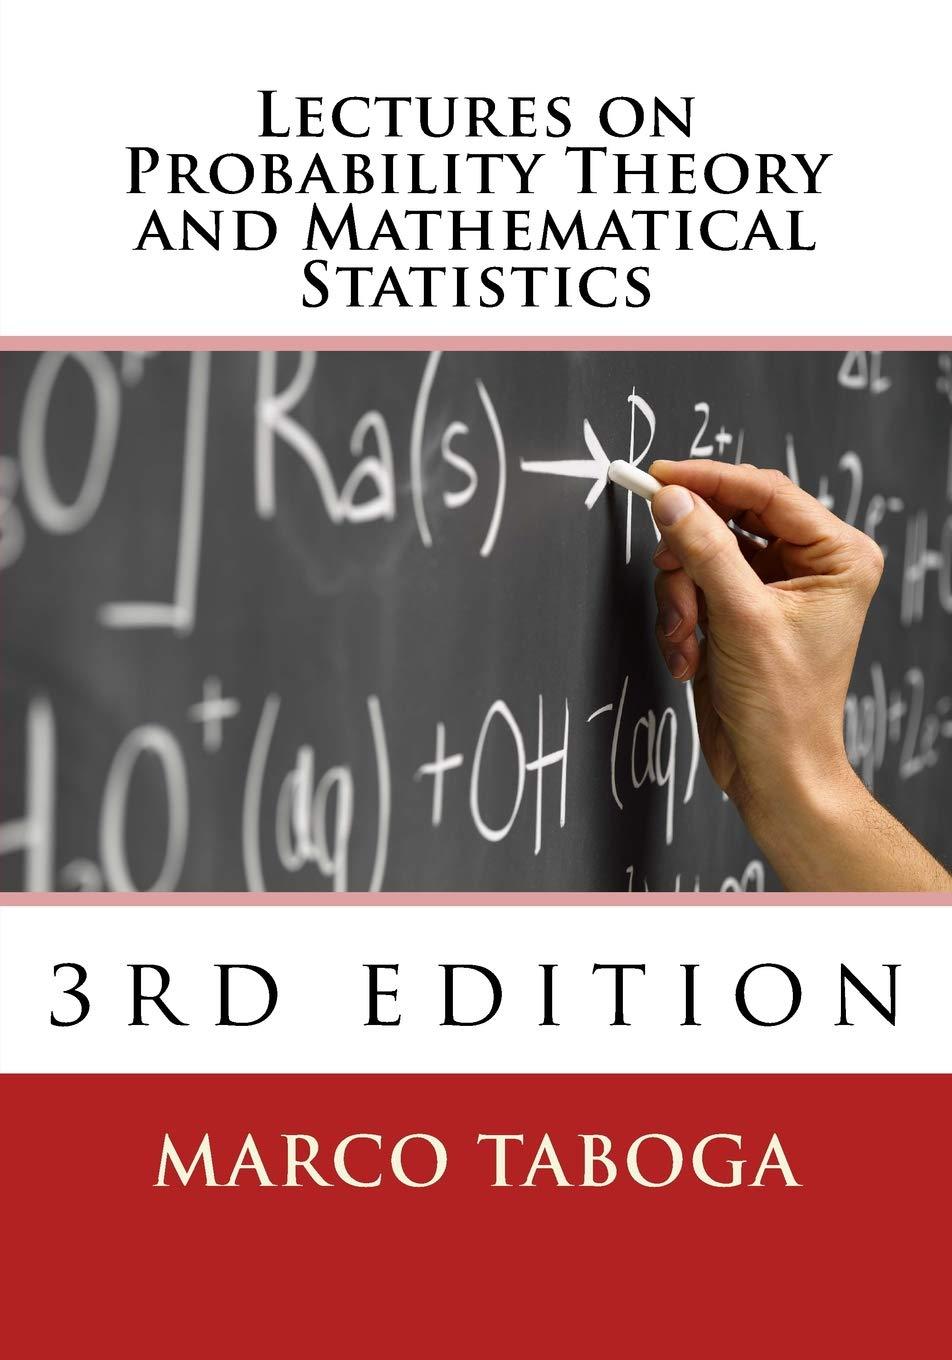 lectures on probability theory and mathematical statistics 3rd edition marco taboga 1981369198, 9781981369195